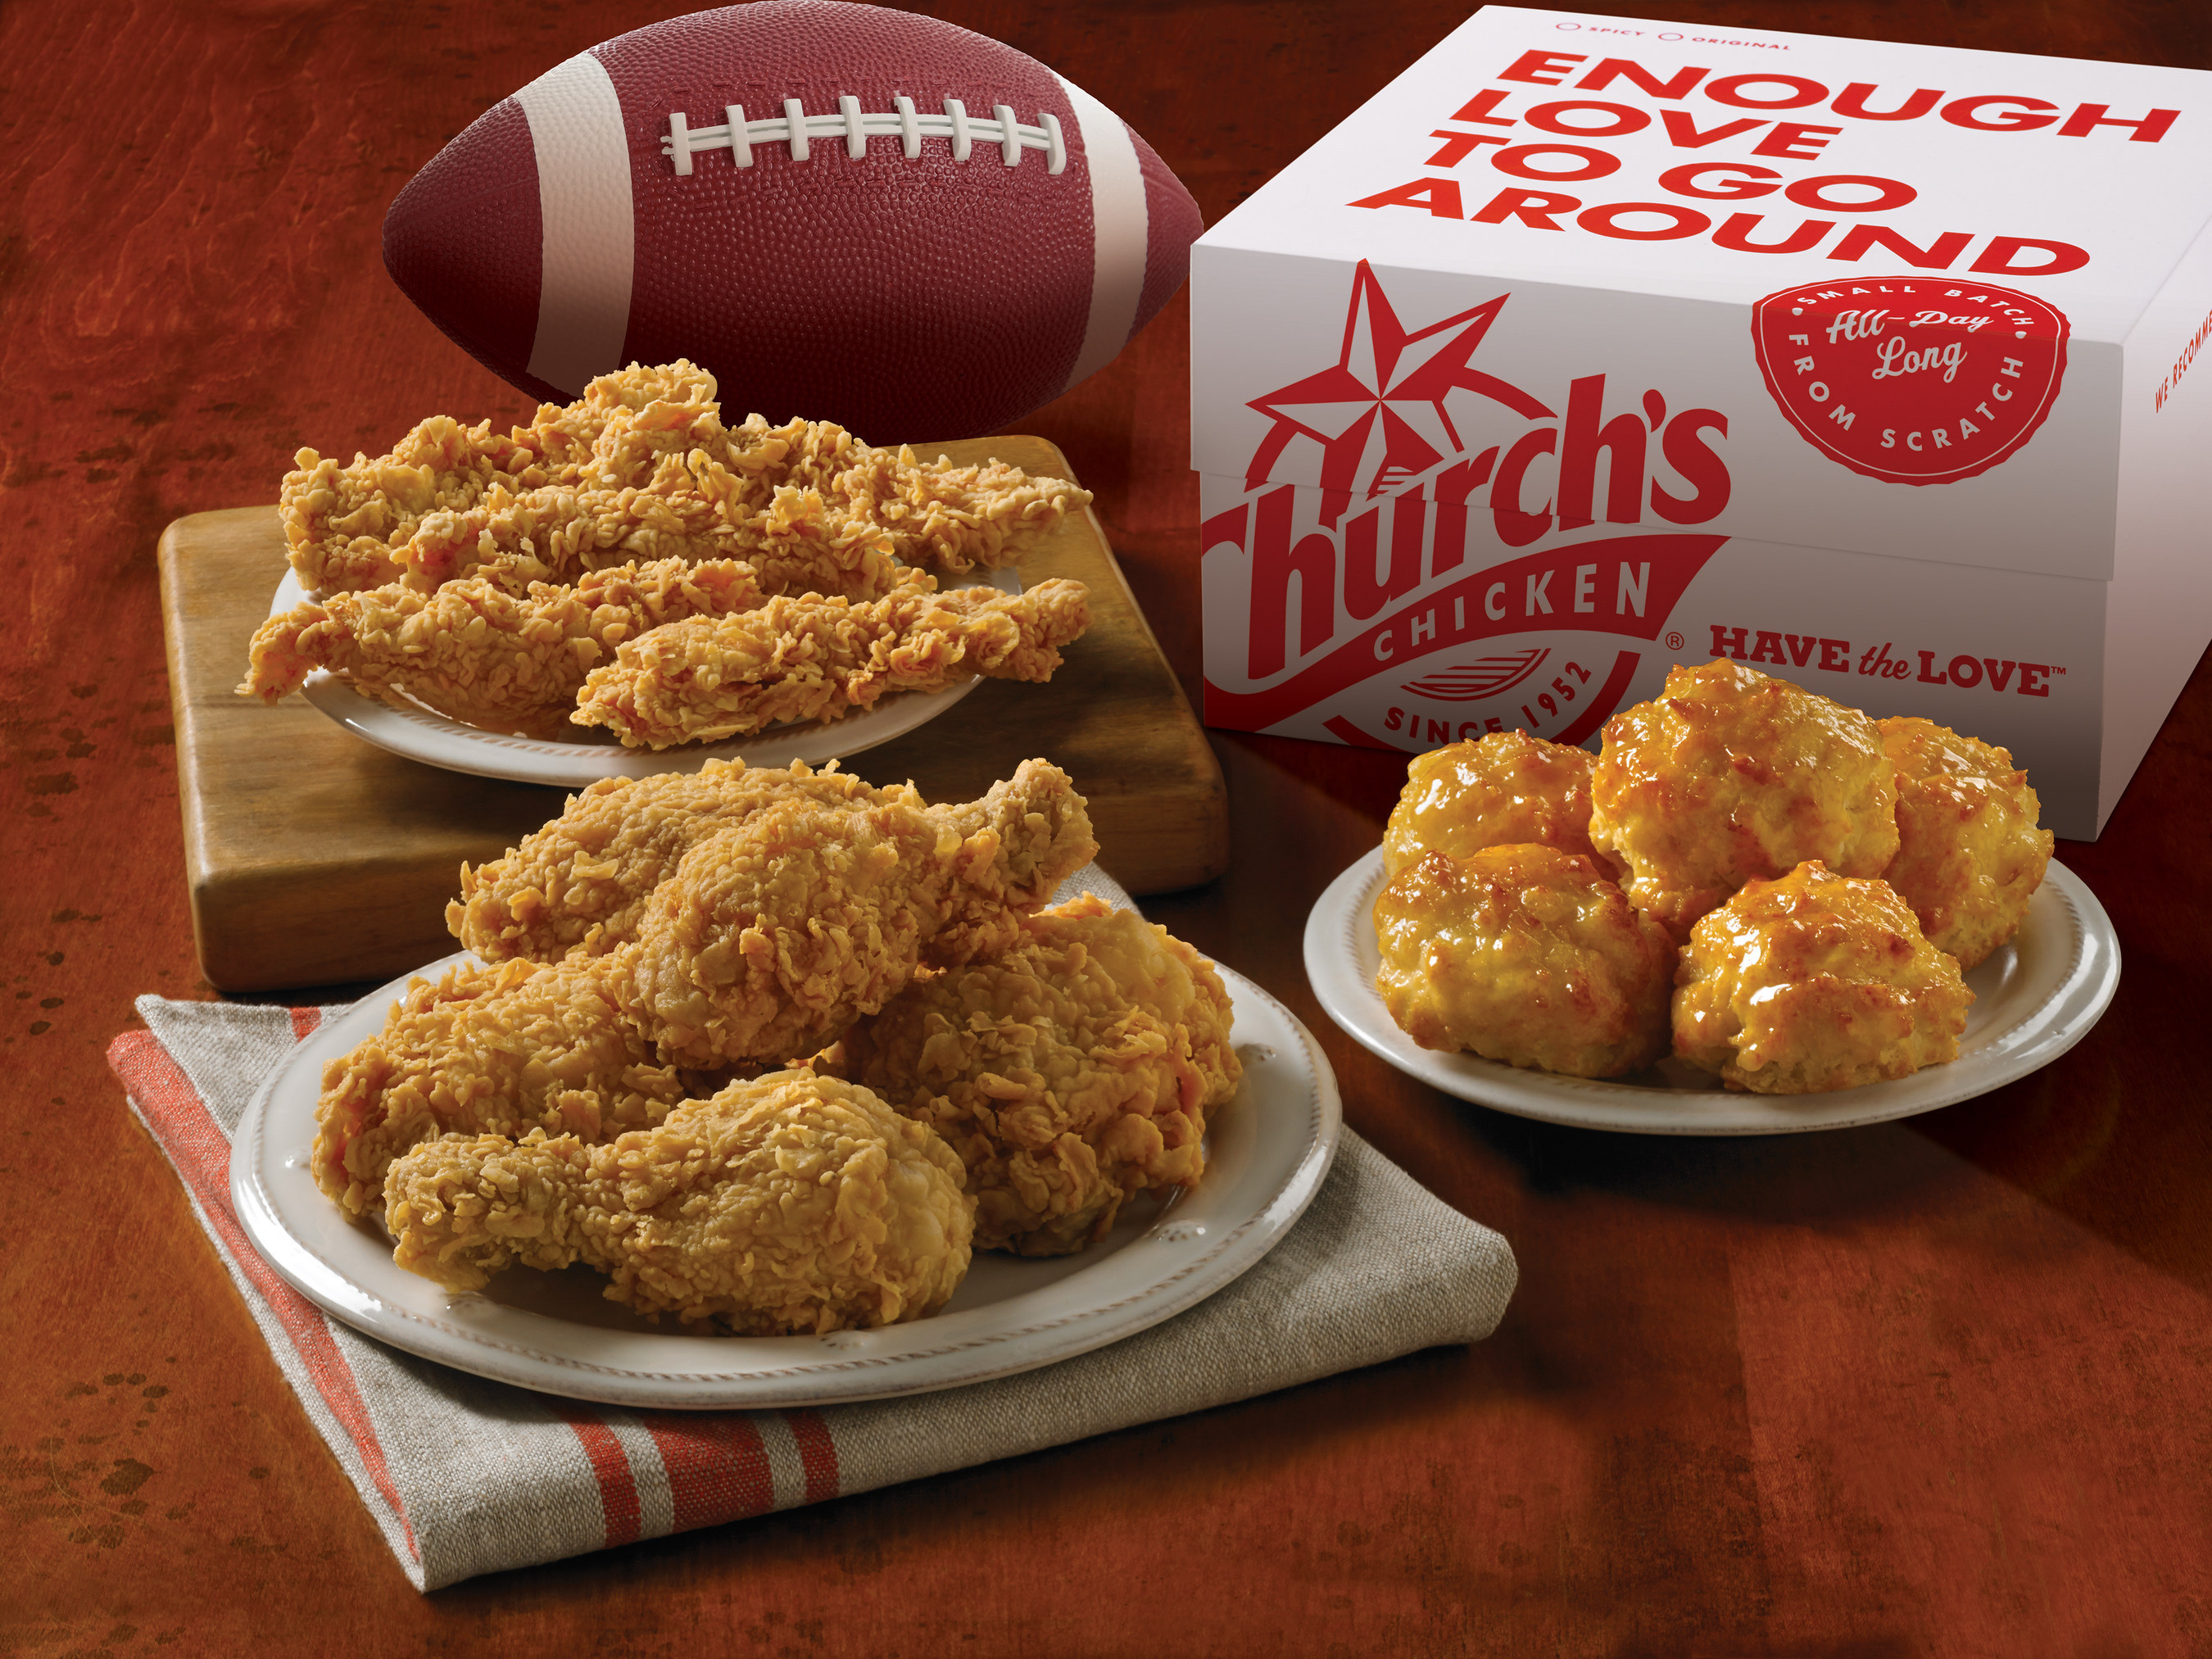 Church's Chicken serves up food for five people for $10 with the Big Game Box, available now through Sunday, February 1.